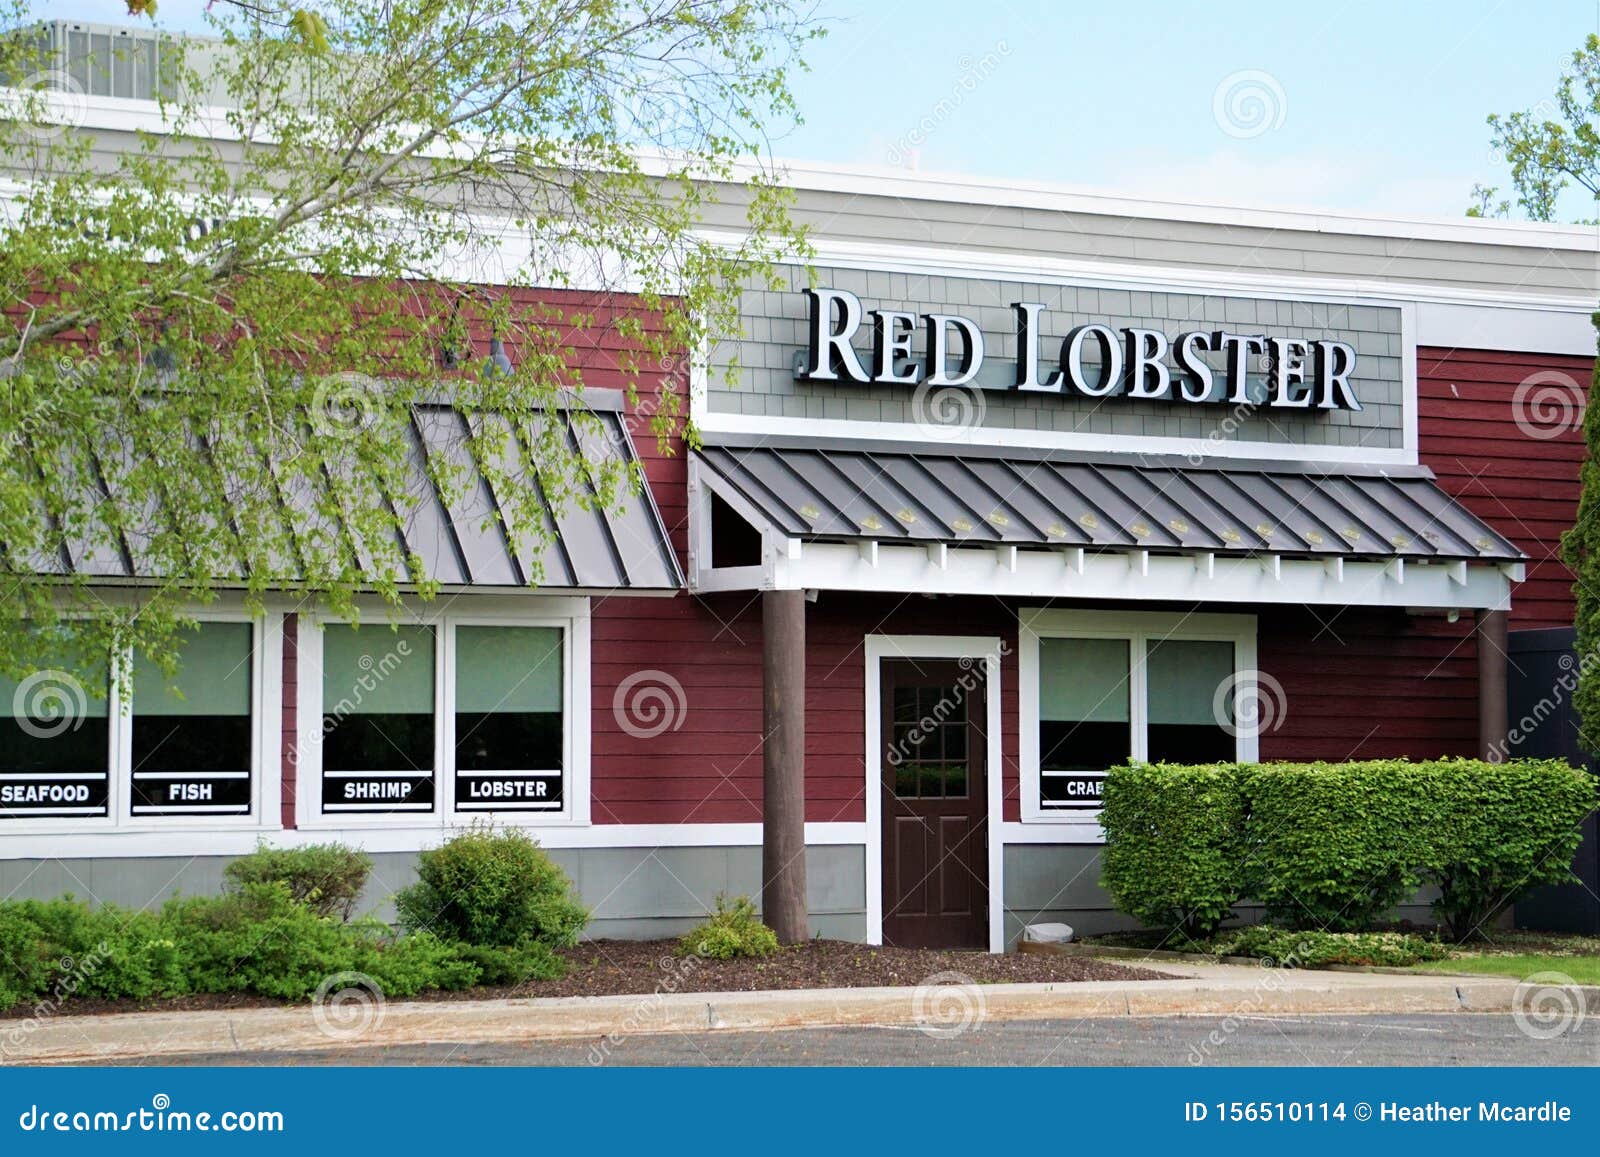 Red Lobster Restaurant Storefront Danbury Ct April 2019 Editorial Stock Image Image Of Foreground Fashioned 156510114 [ 1156 x 1600 Pixel ]